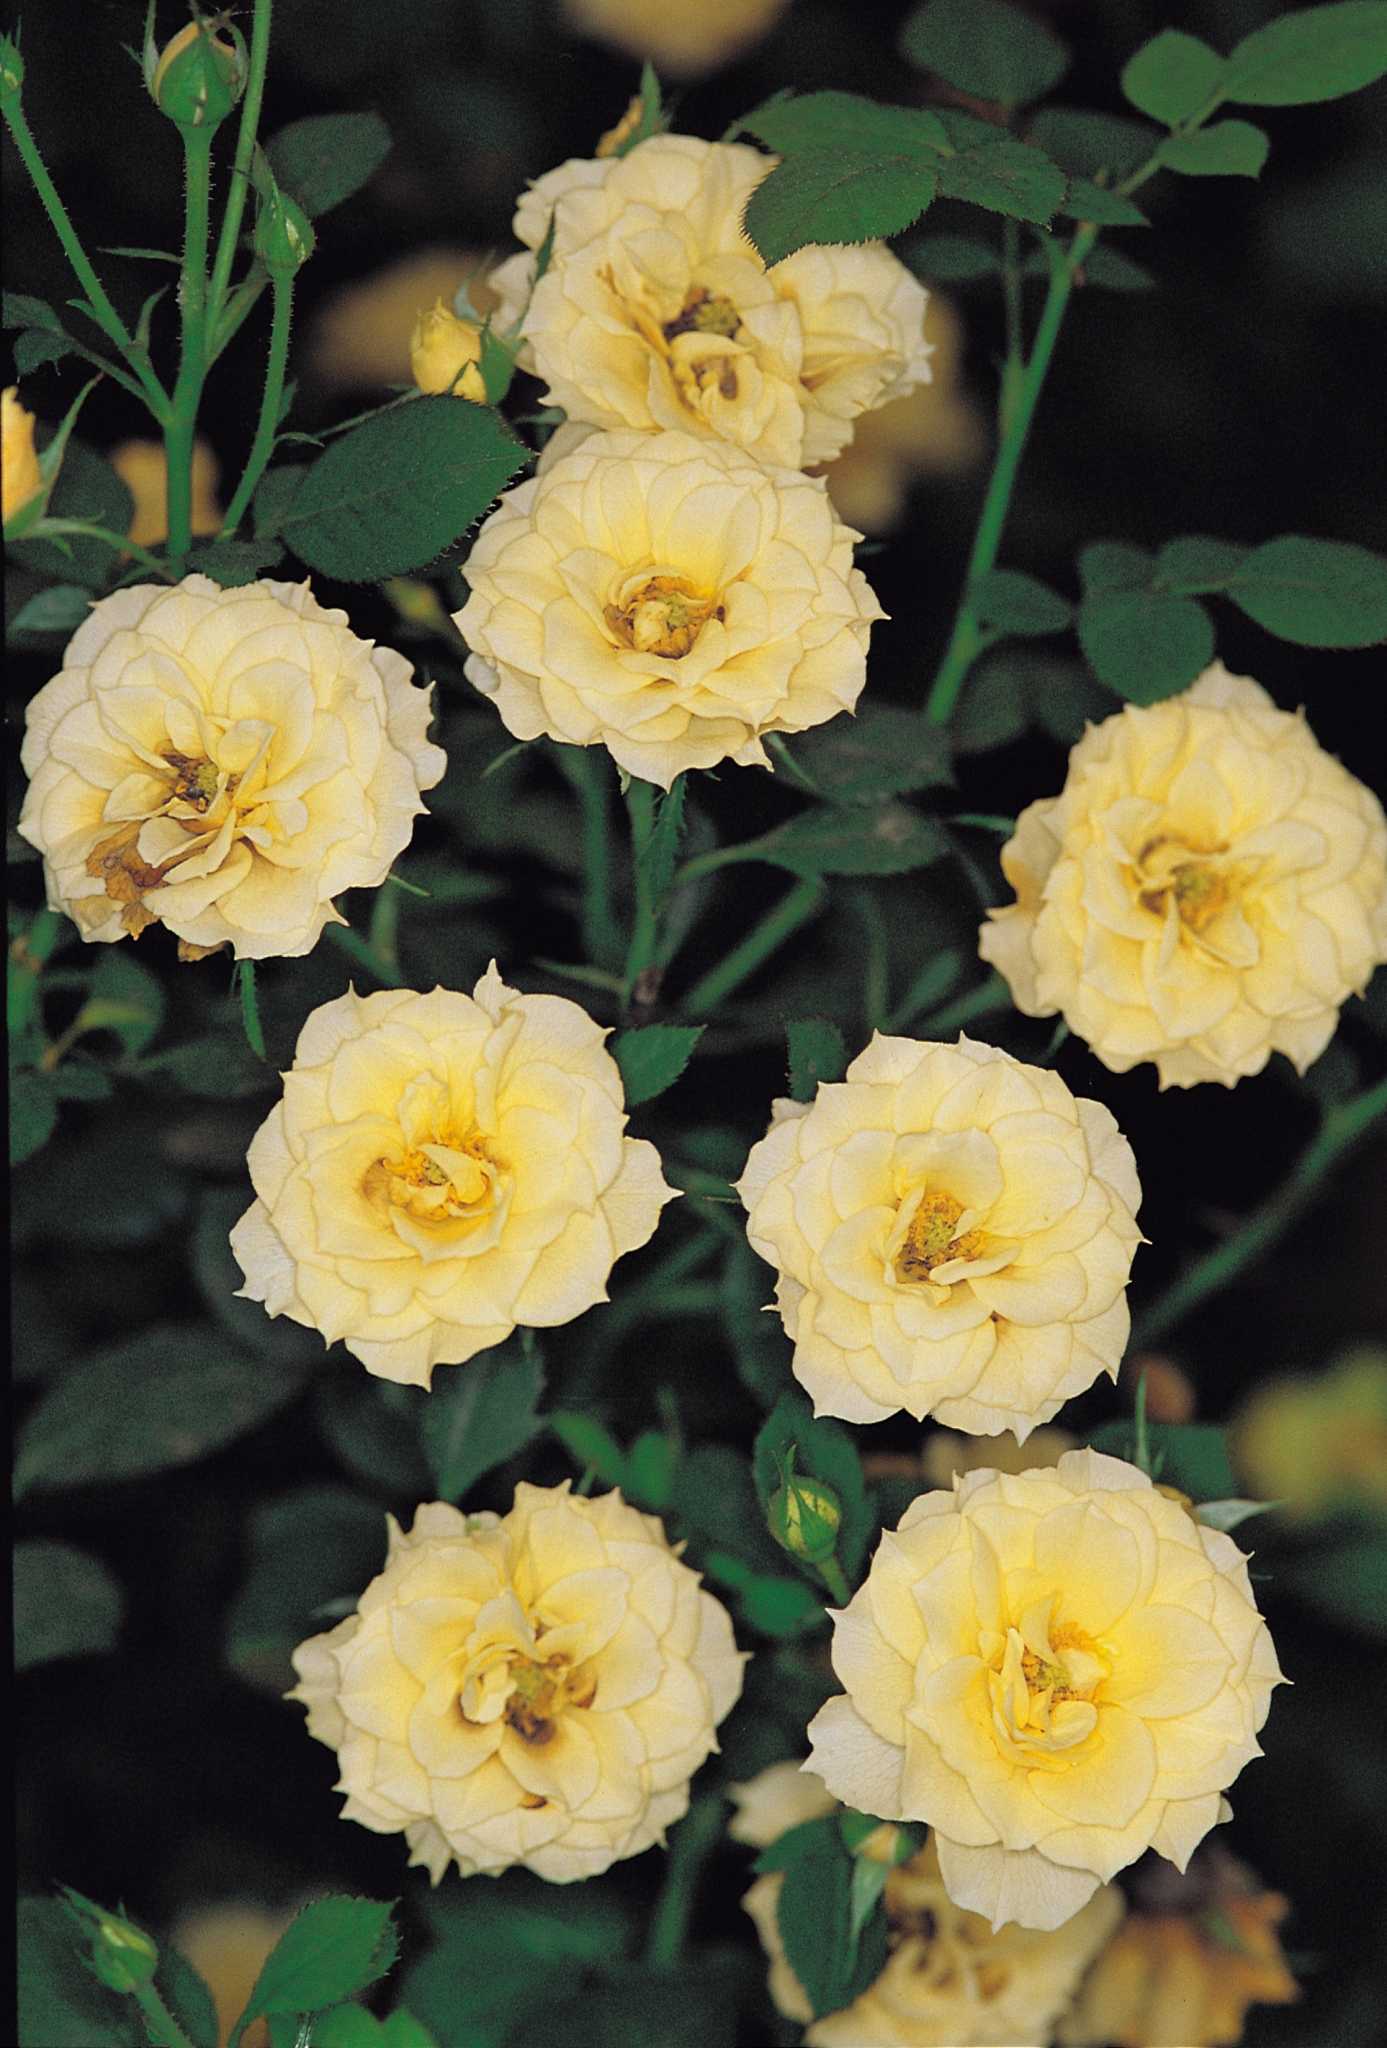 Budworm Control: How To Get Rid Of Budworms On Roses